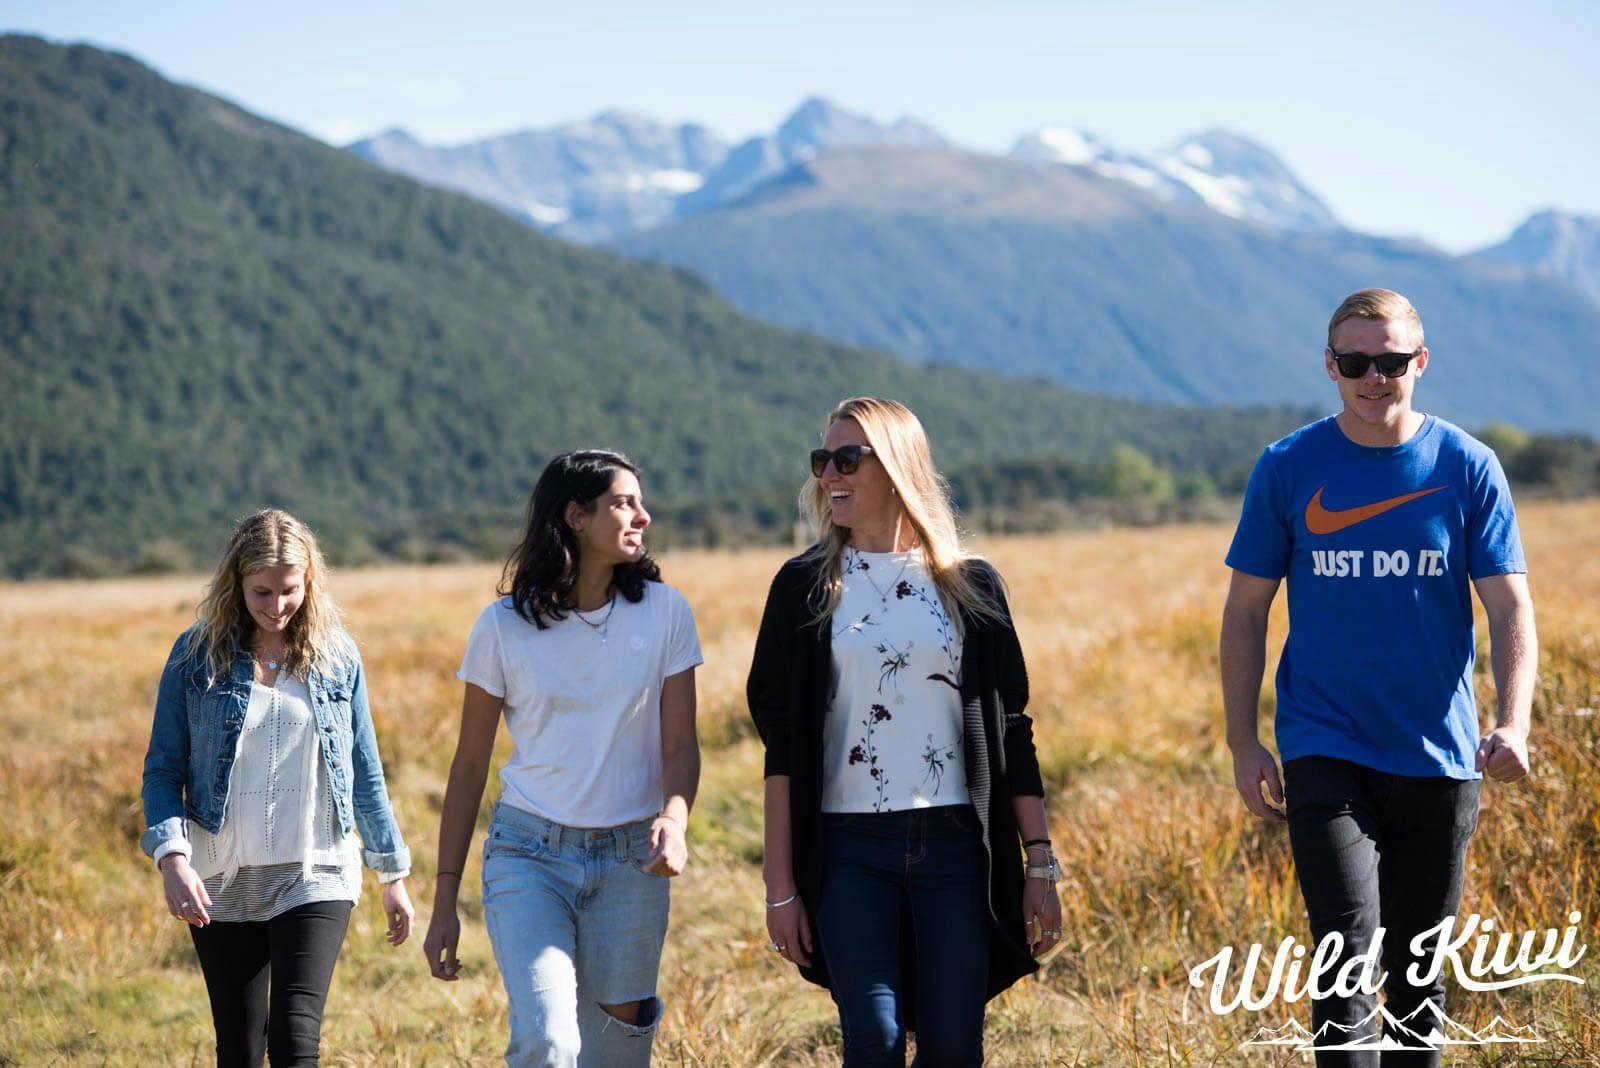 Experience incredible things on New Zealand holidays - Forge firm friendships on the way